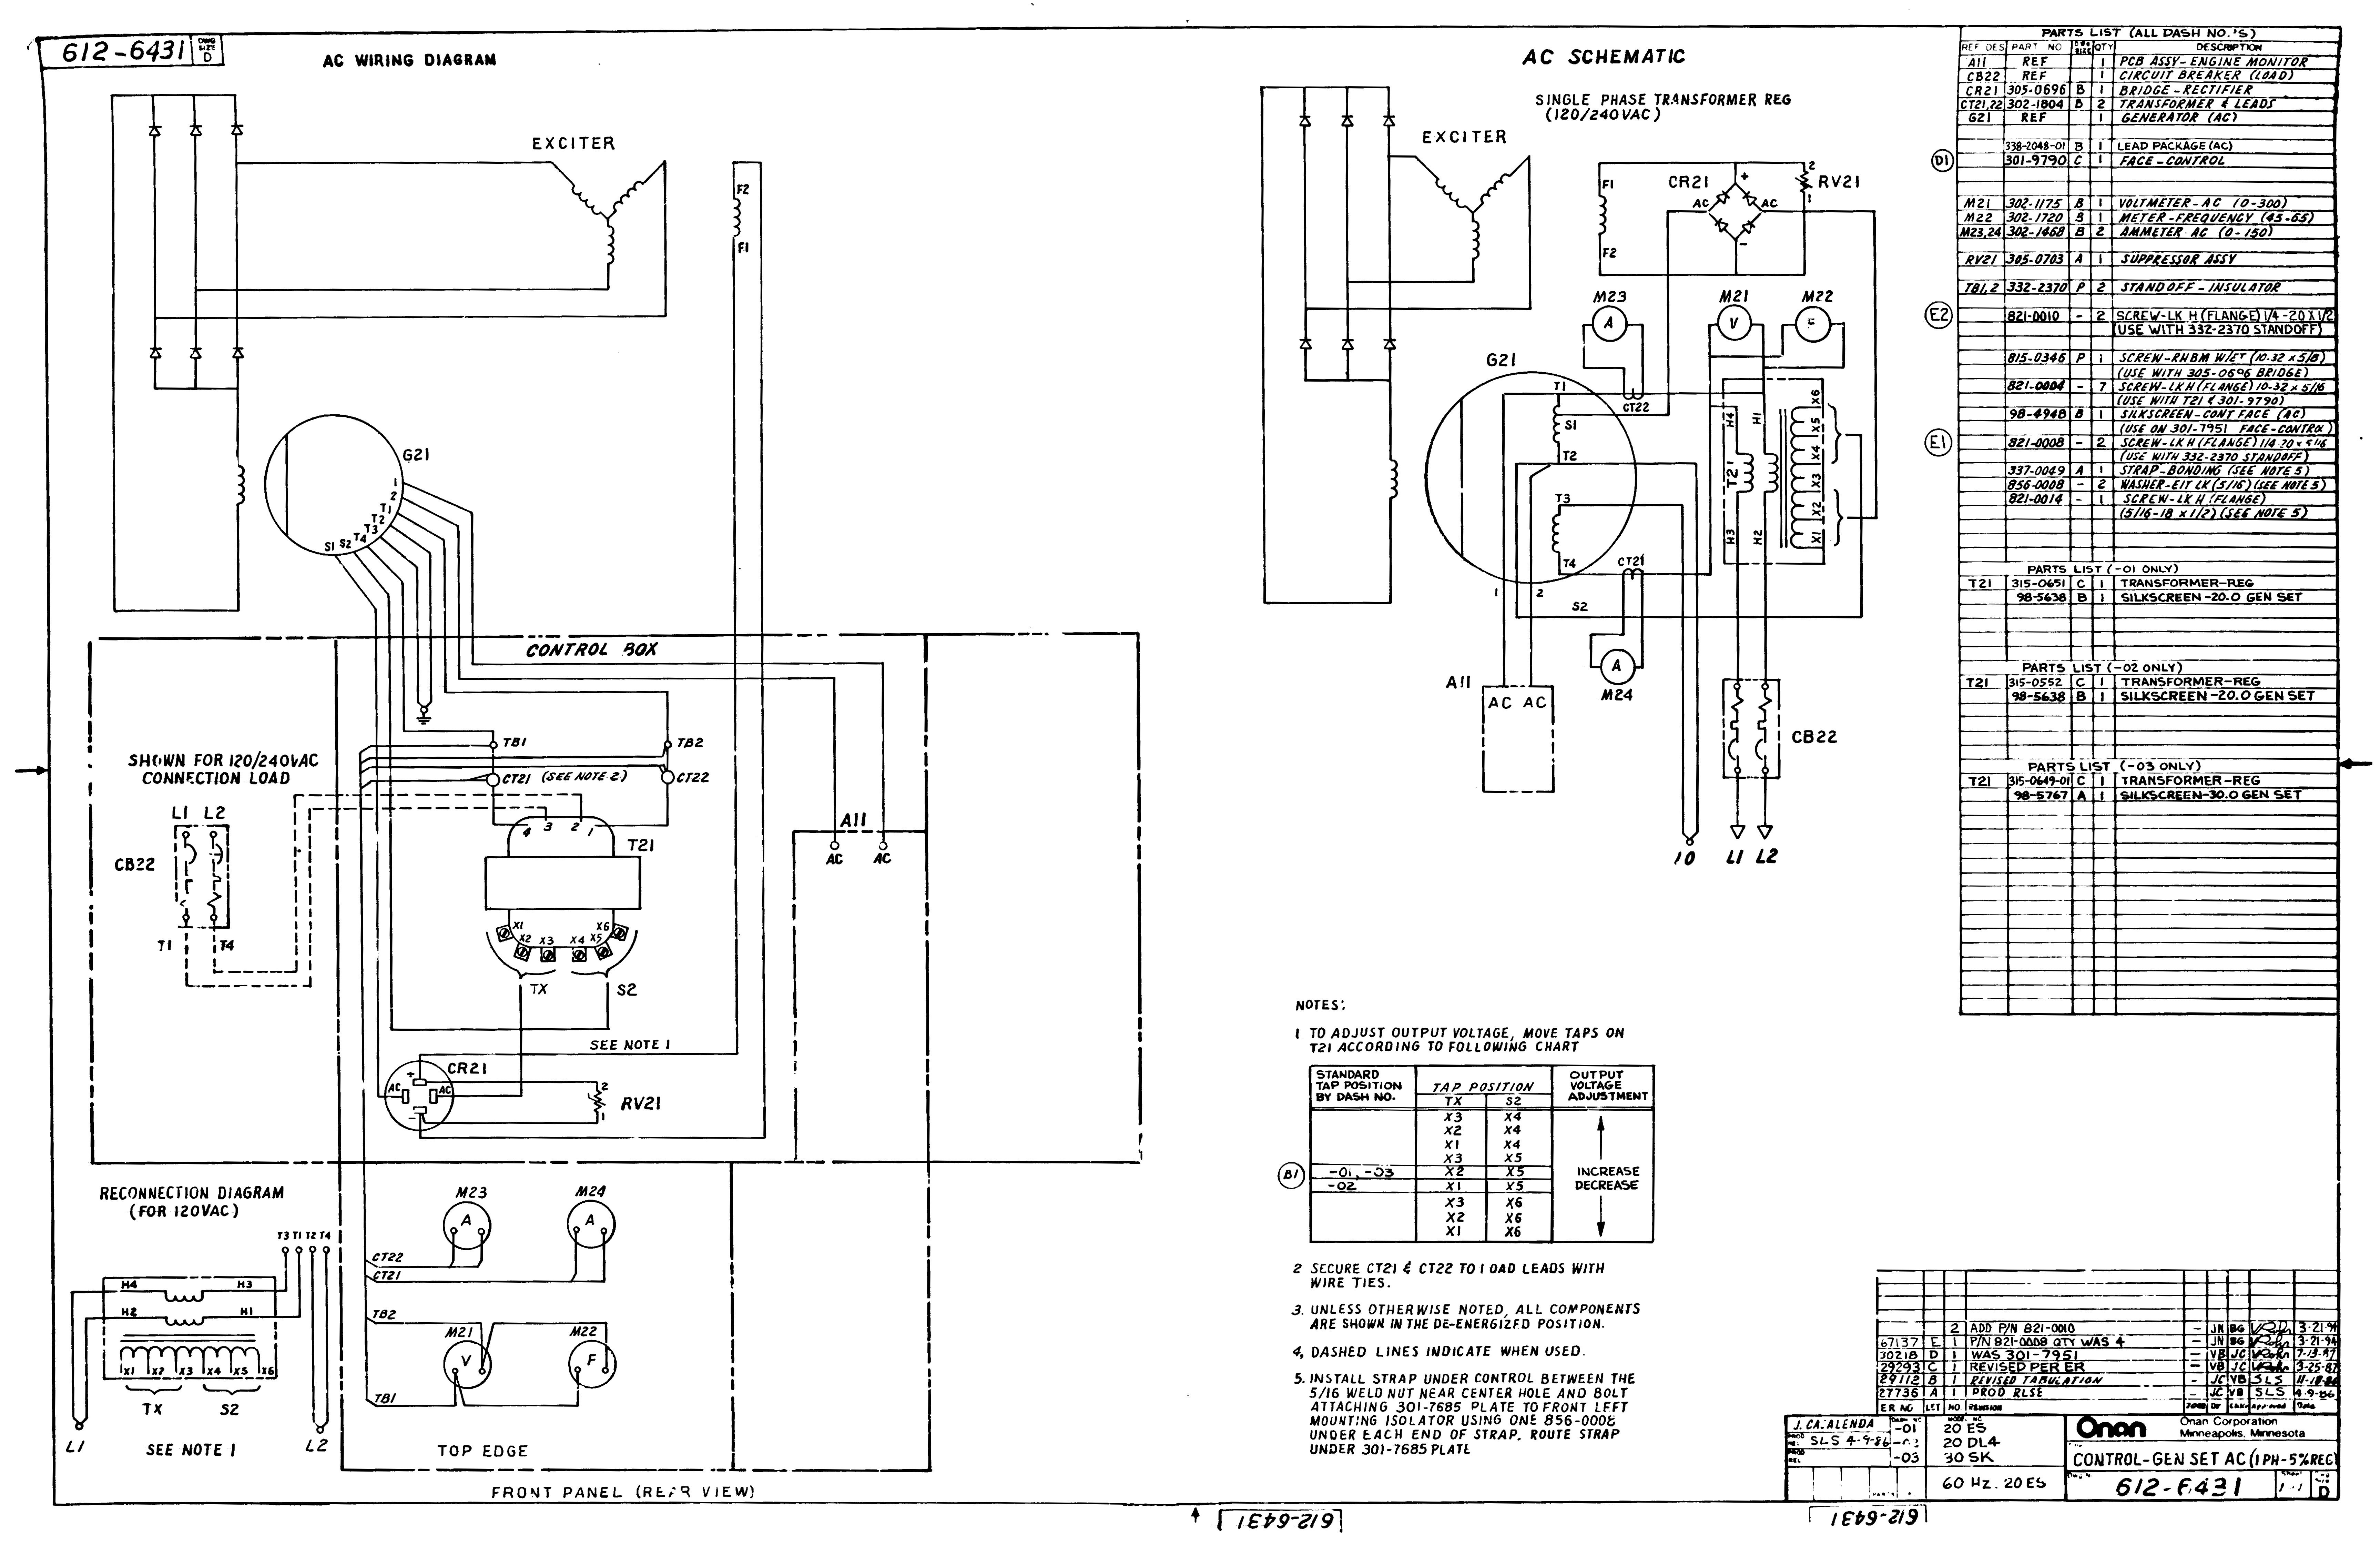 Electrical Wiring Diagram House Aktive Crossoverfrequenzweiche Mit Max4478 360customs Crossover Schematic Rev 0d Wiring Lighting